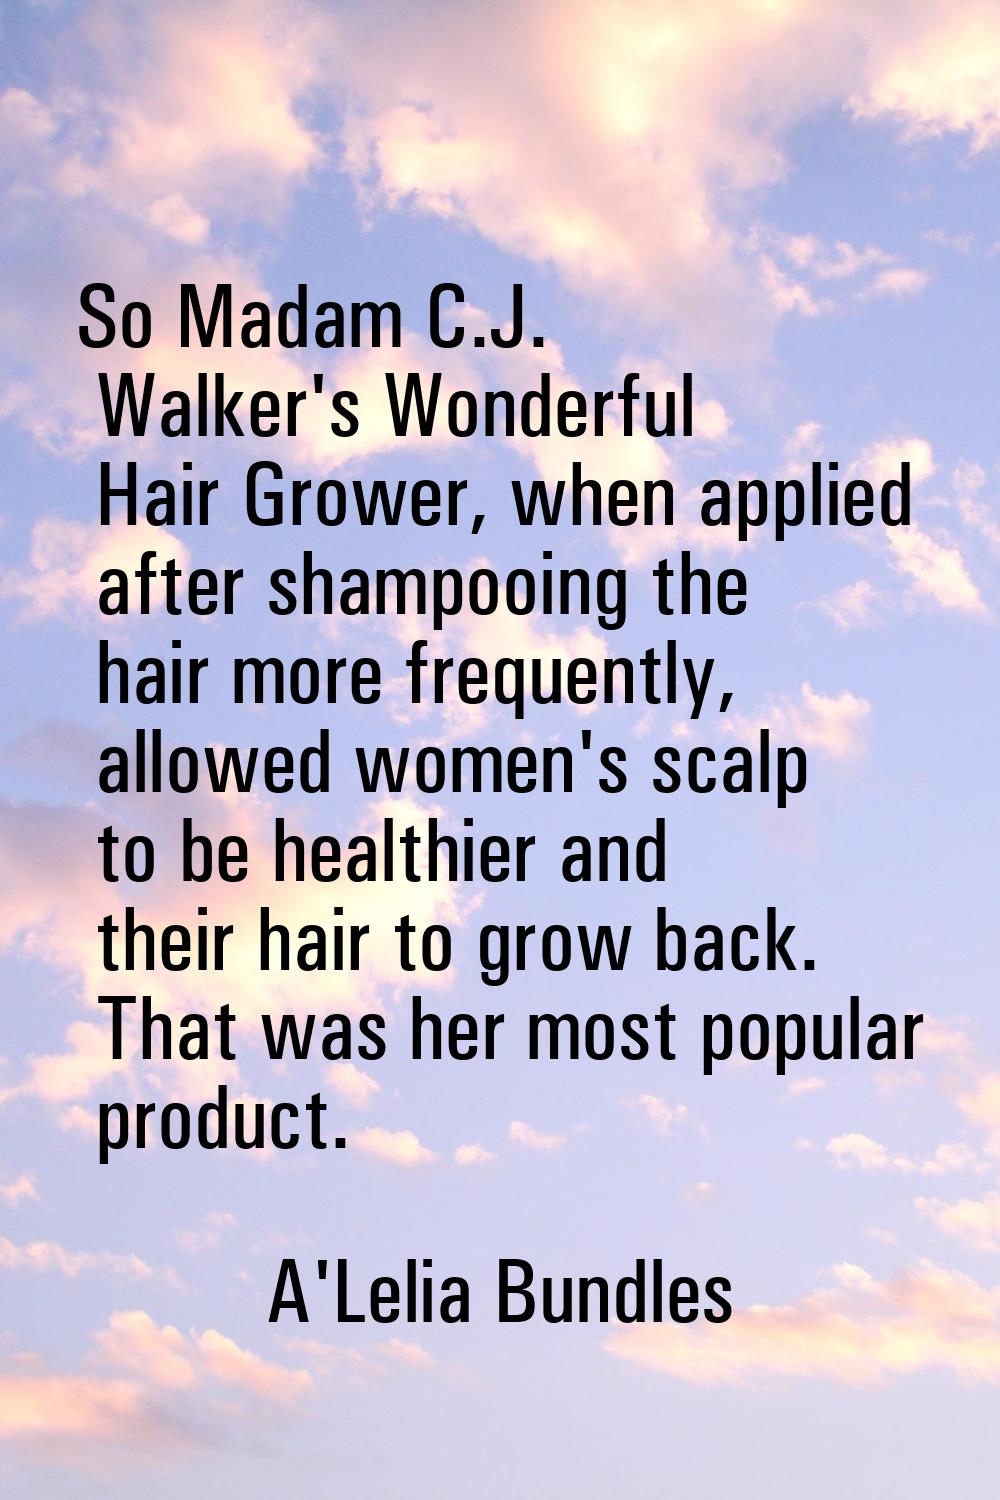 So Madam C.J. Walker's Wonderful Hair Grower, when applied after shampooing the hair more frequentl